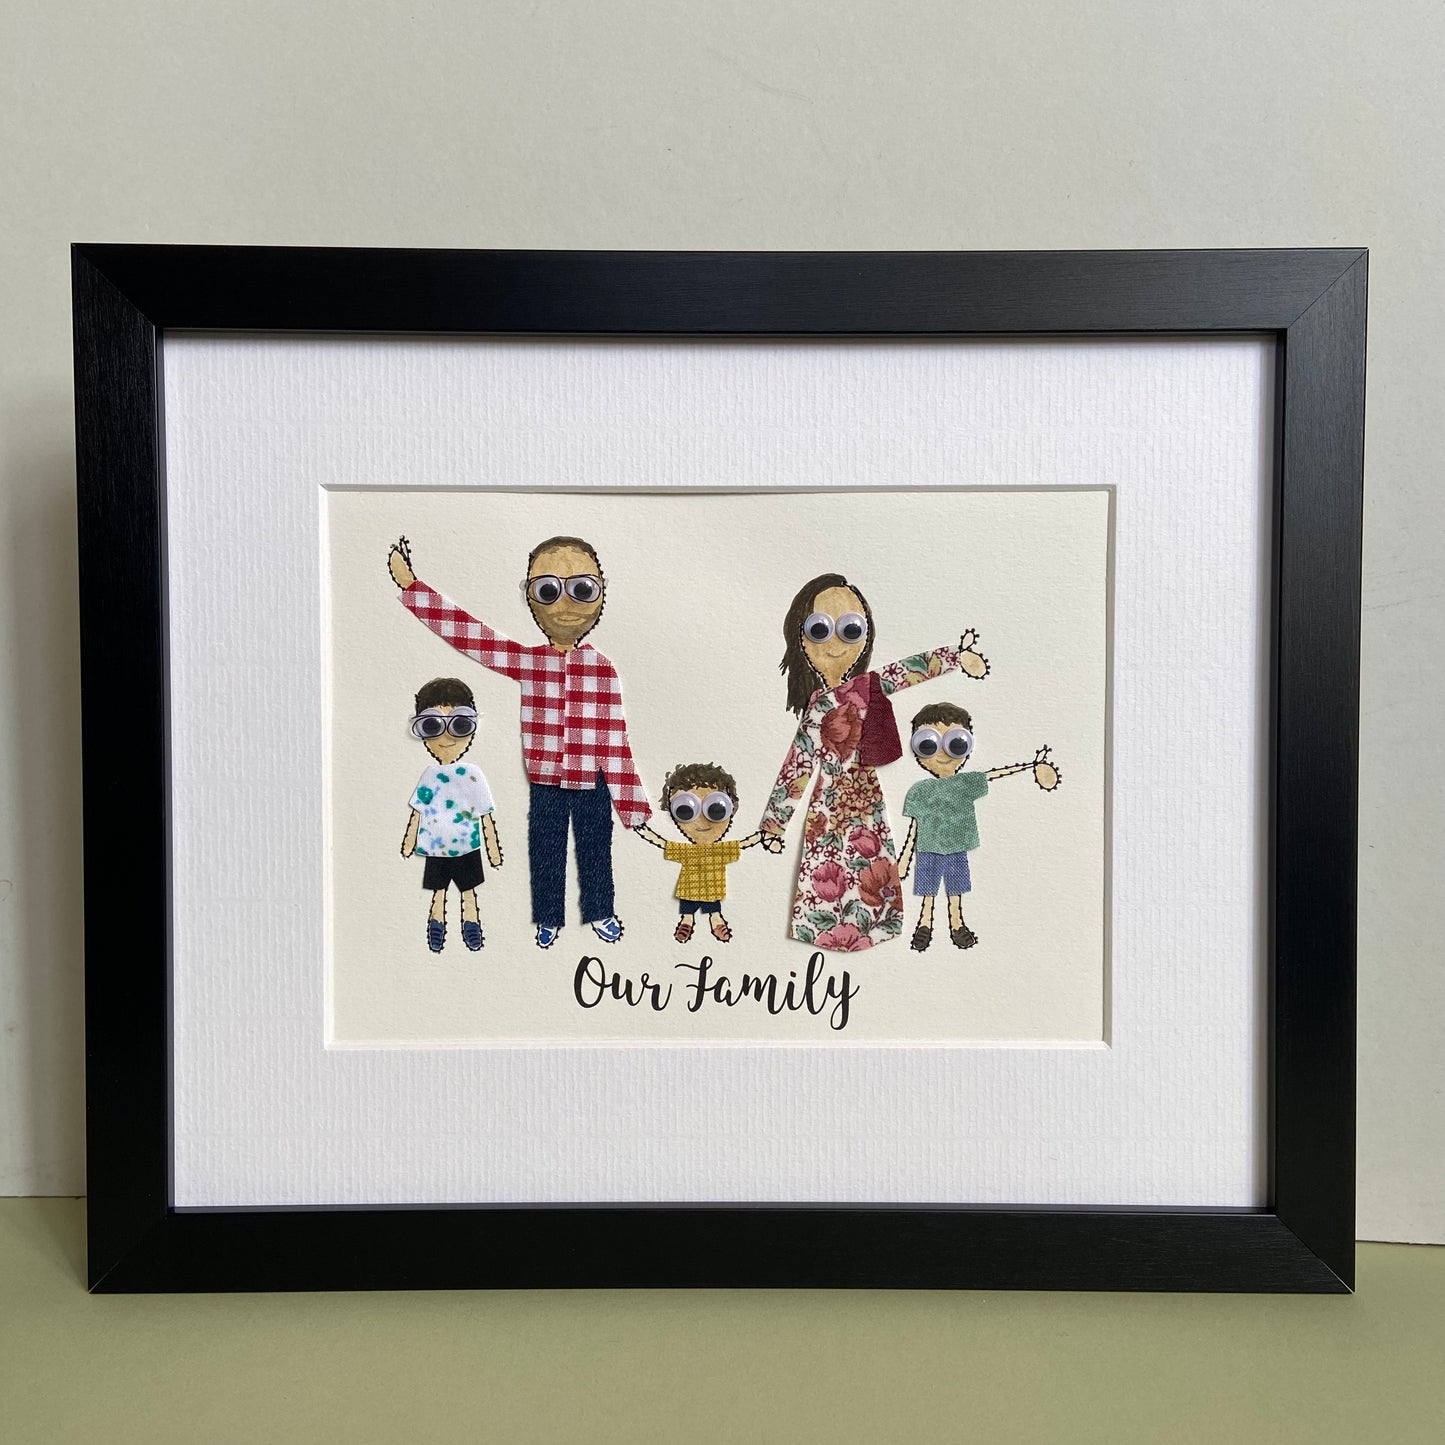 Personalised Couple with children/pets embroidered artwork